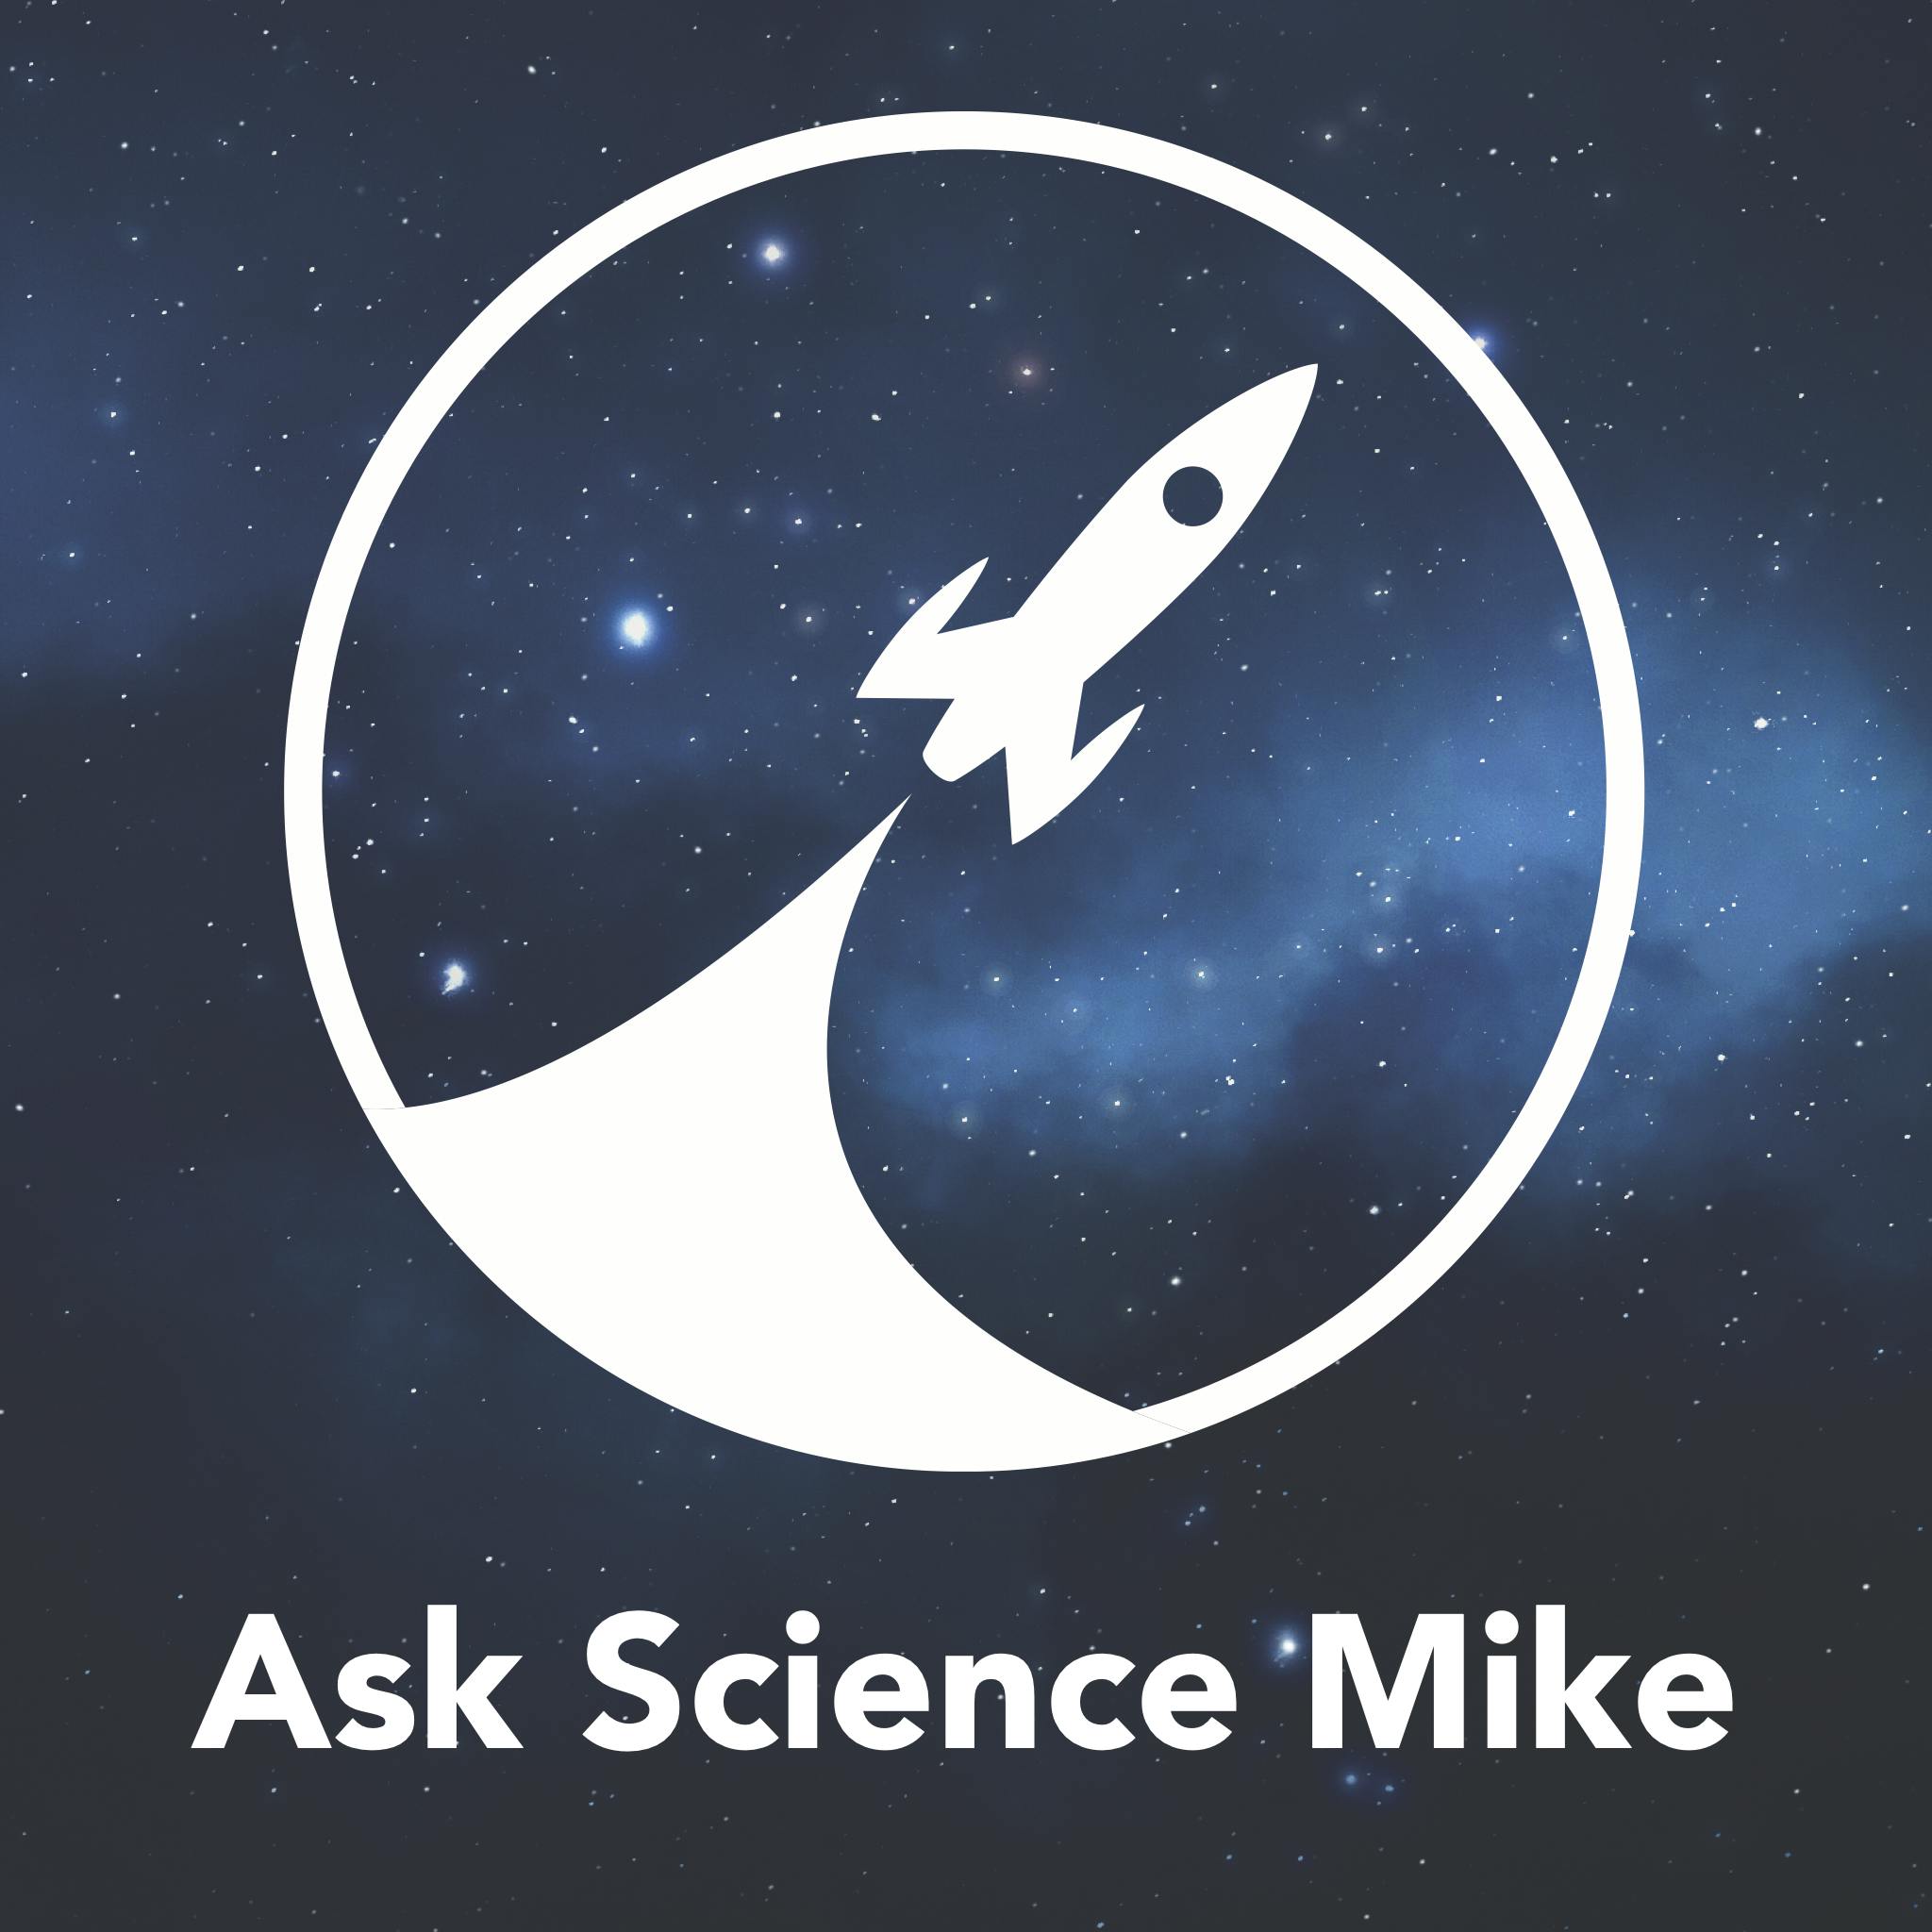 Ask Science Mike: Episode 240 - The Last One